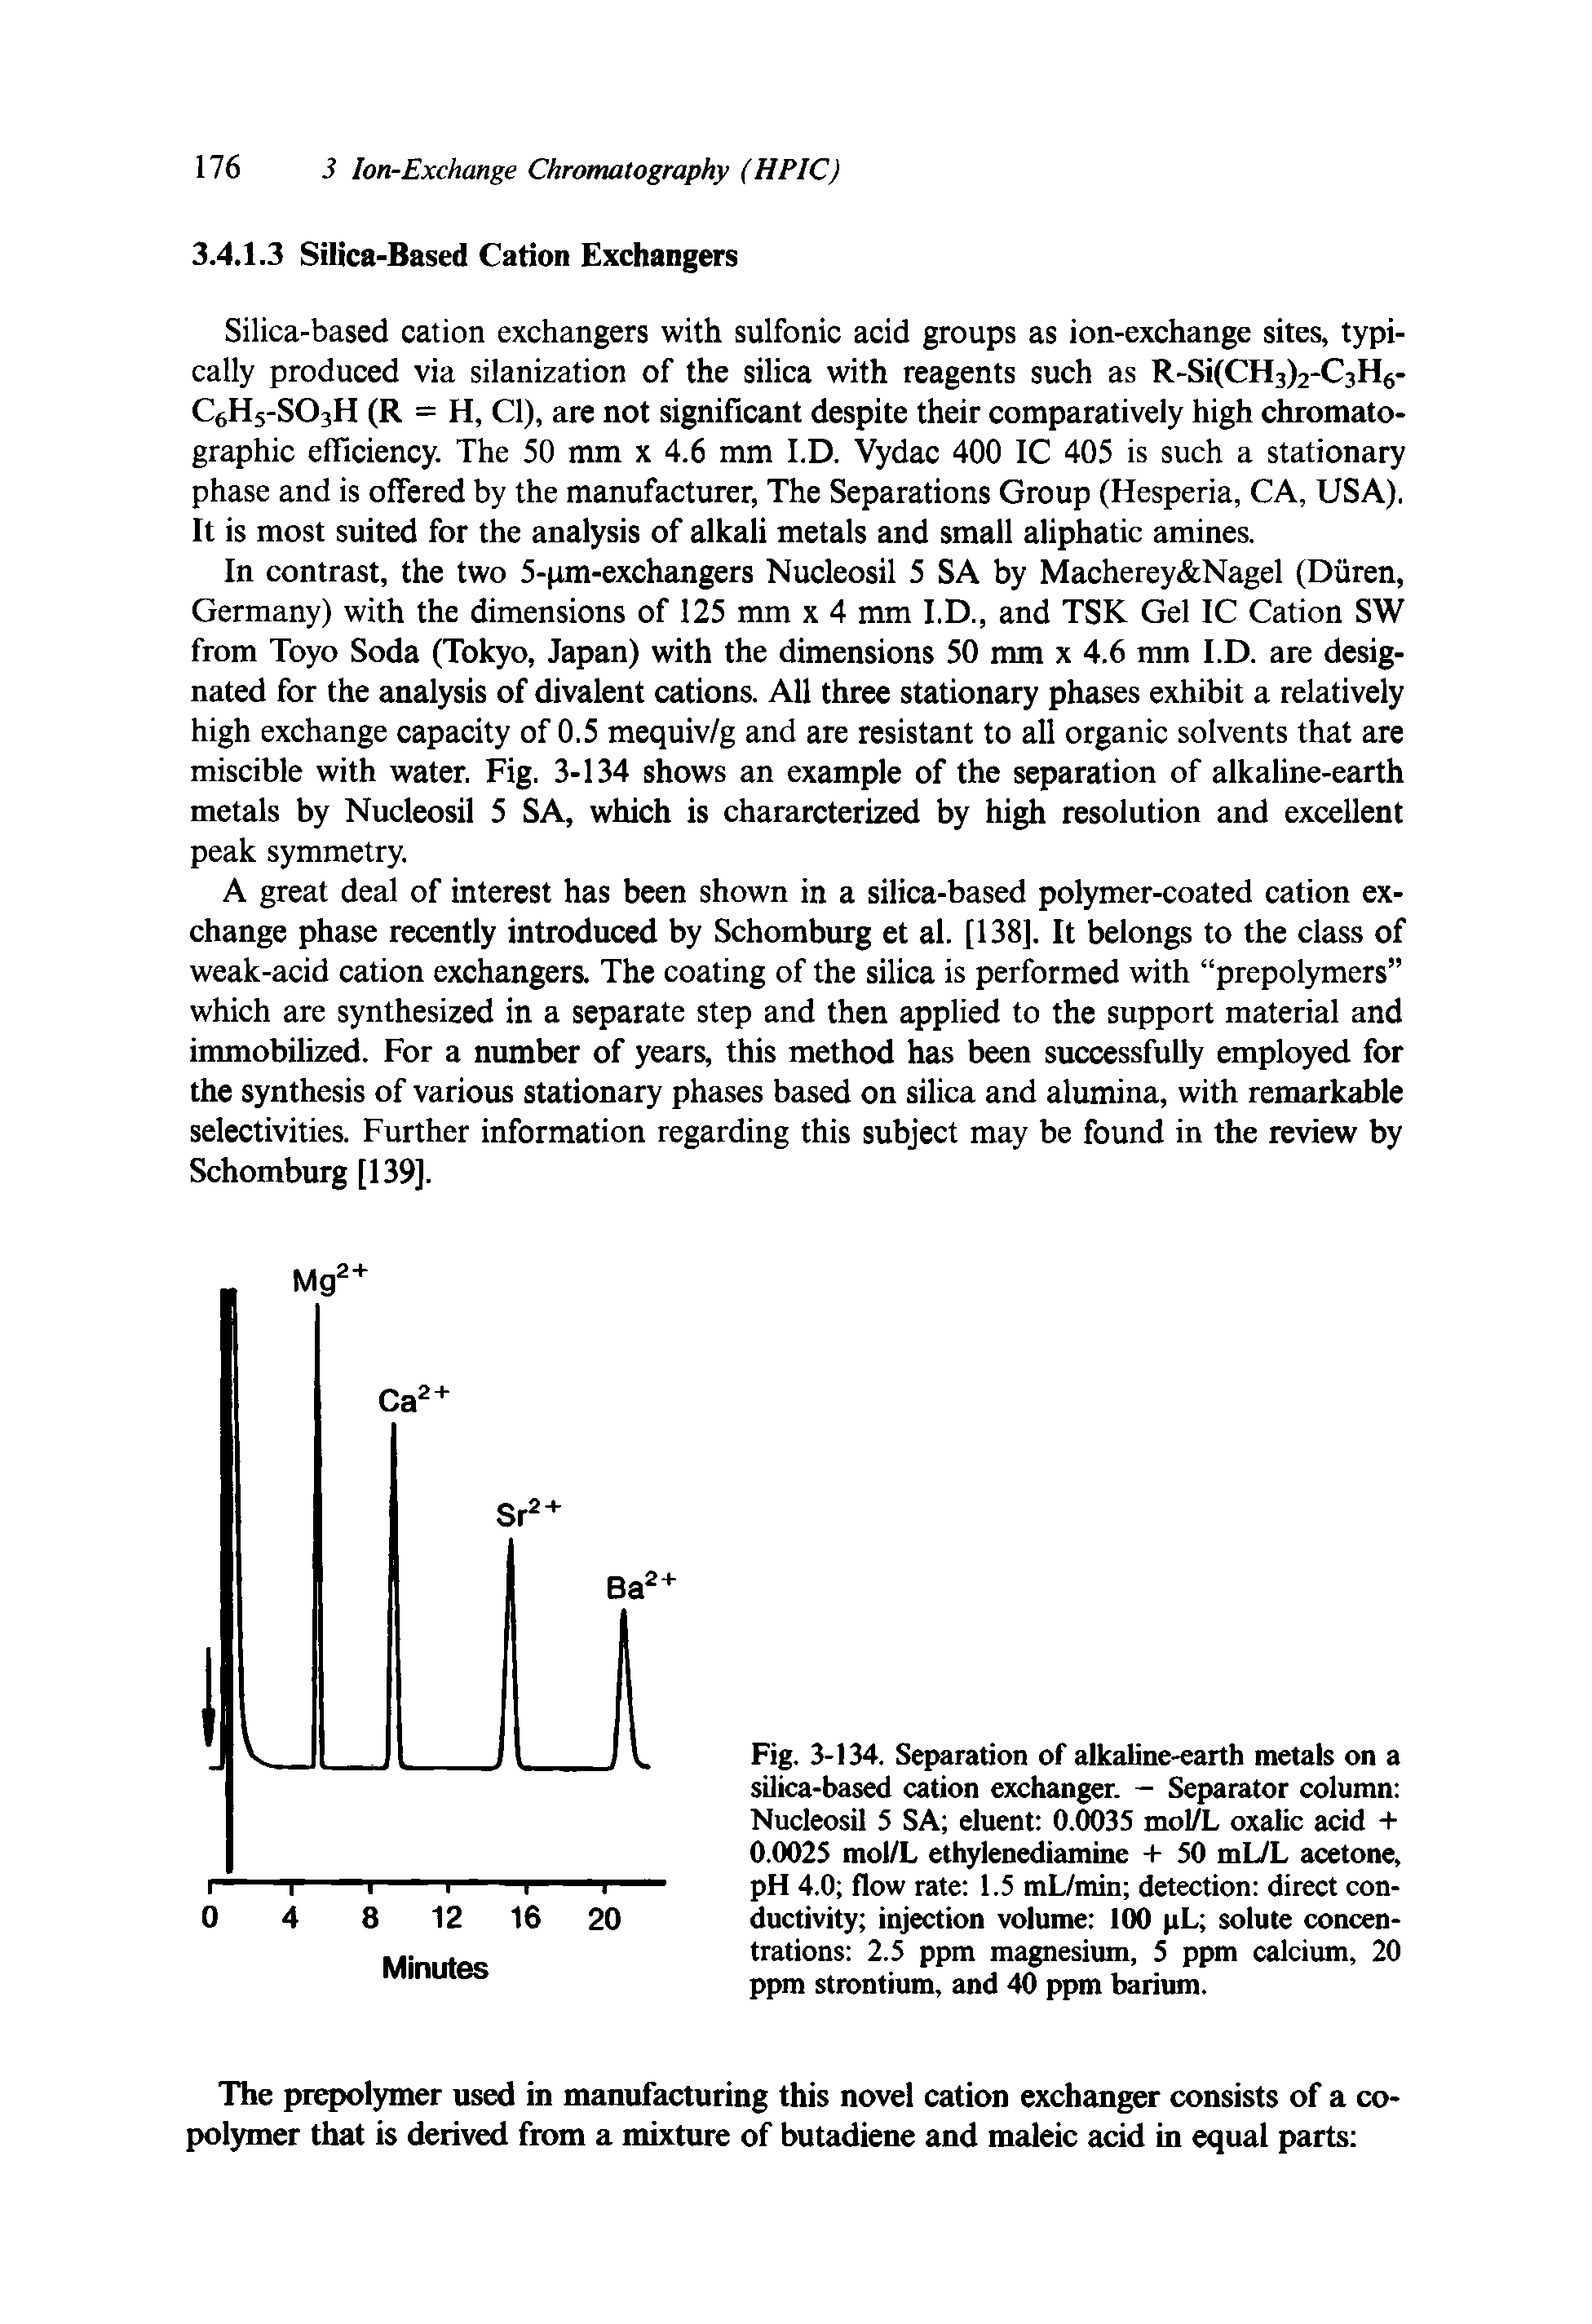 Fig. 3-134. Separation of alkaline-earth metals on a silica-based cation exchanger. - Separator column Nucleosil 5 SA eluent 0.0035 mol/L oxalic acid + 0.0025 mol/L ethylenediamine + 50 mL/L acetone, pH 4.0 flow rate 1.5 mL/min detection direct conductivity injection volume 100 pL solute concentrations 2.5 ppm magnesium, 5 ppm calcium, 20 ppm strontium, and 40 ppm barium.